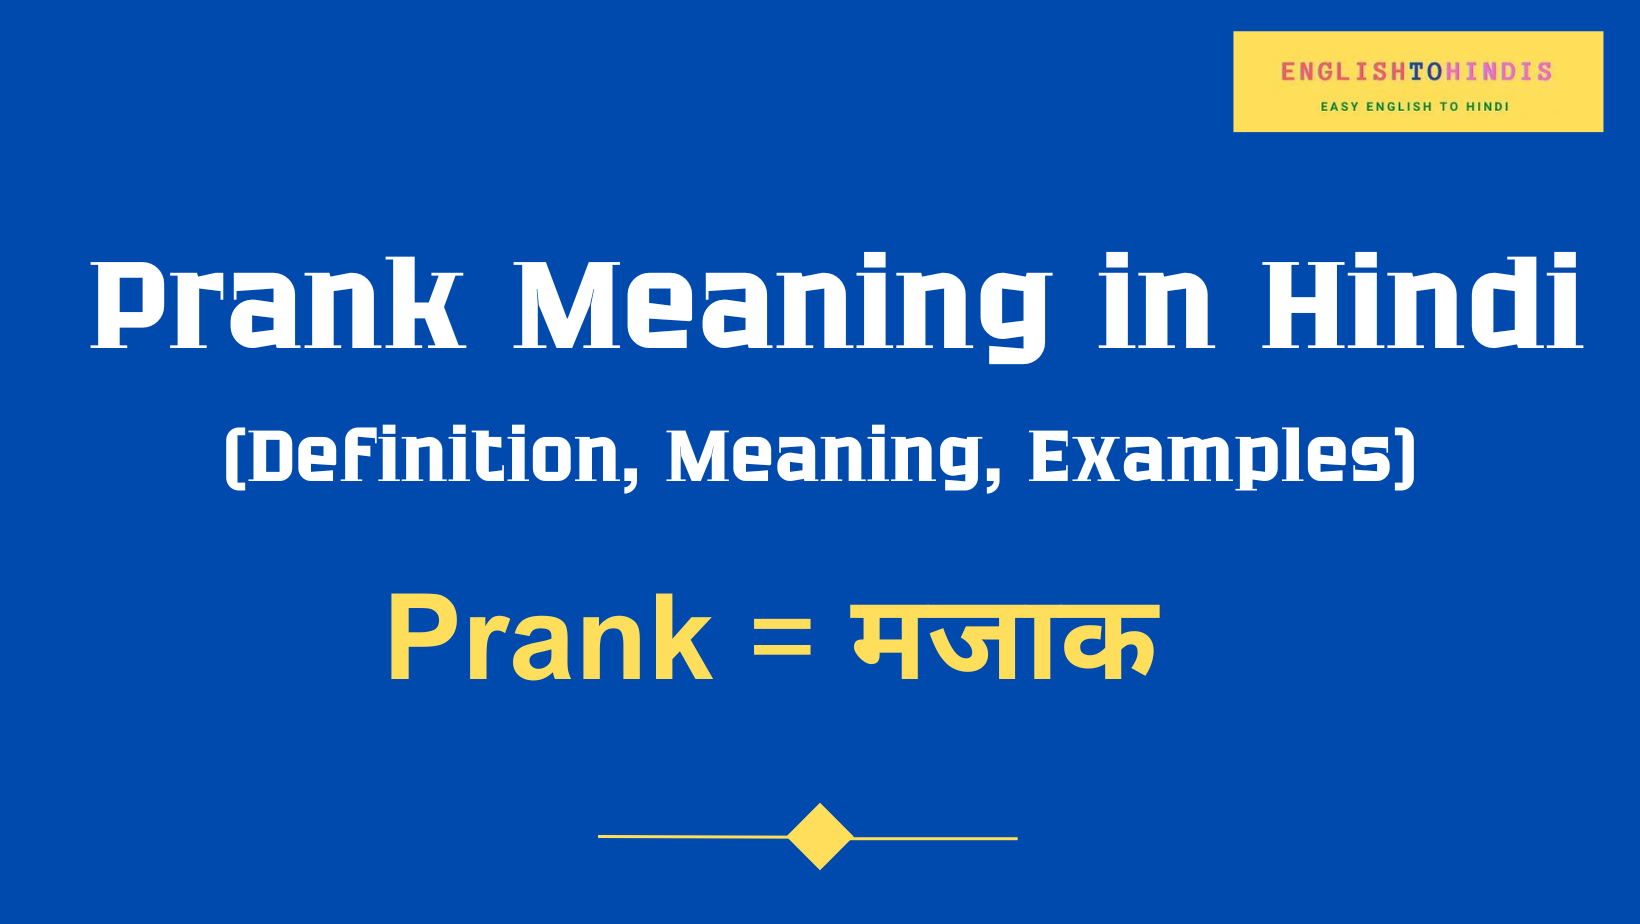 Prank meaning in Hindi